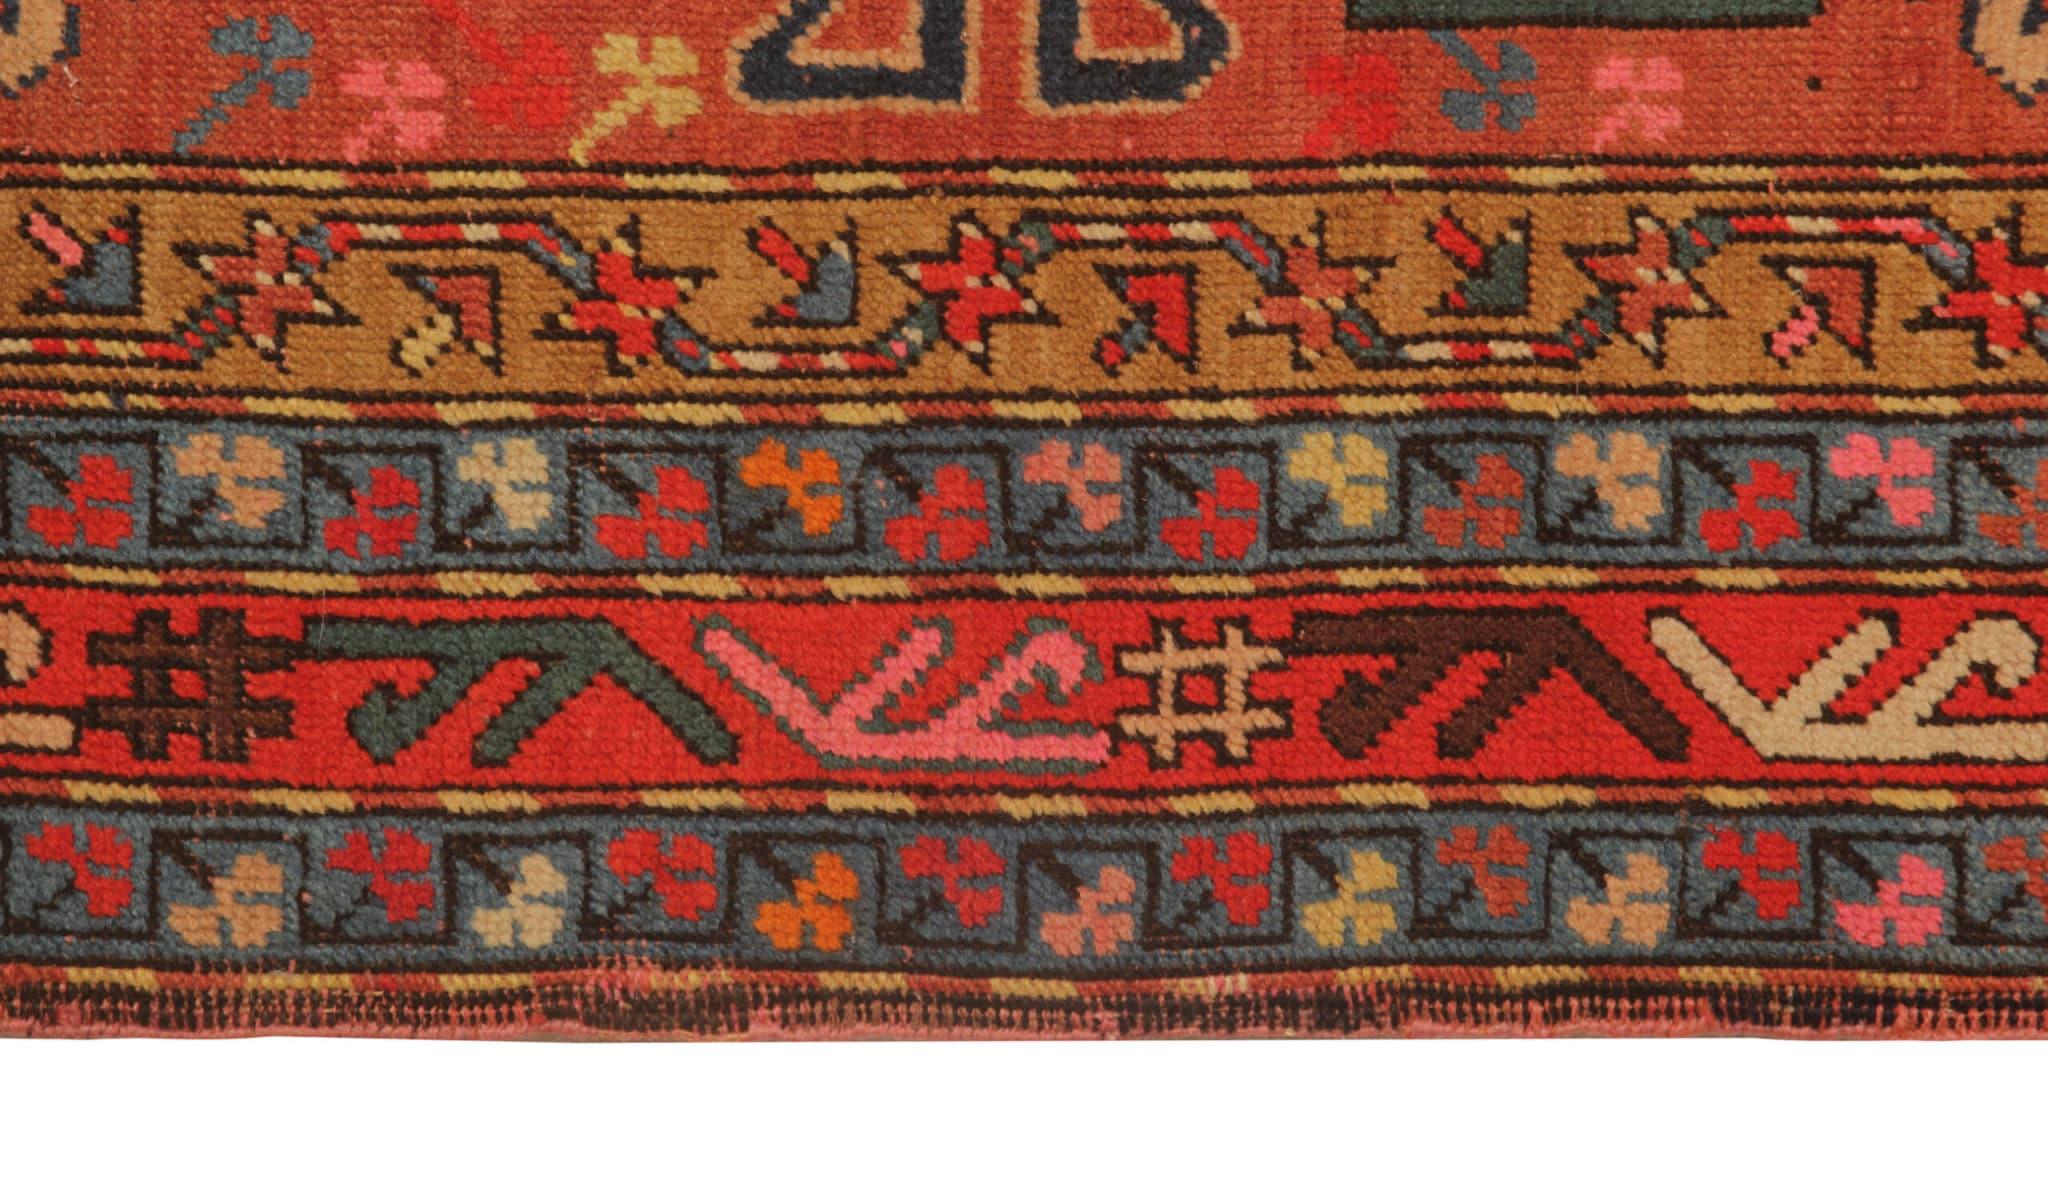 Transport yourself back to the rich tapestry of history with our rare antique red rug, a true masterpiece from the Shirvan region of the Caucasus. Crafted by skilled artisans in the 1880s, this oriental wonder bears witness to centuries of tradition